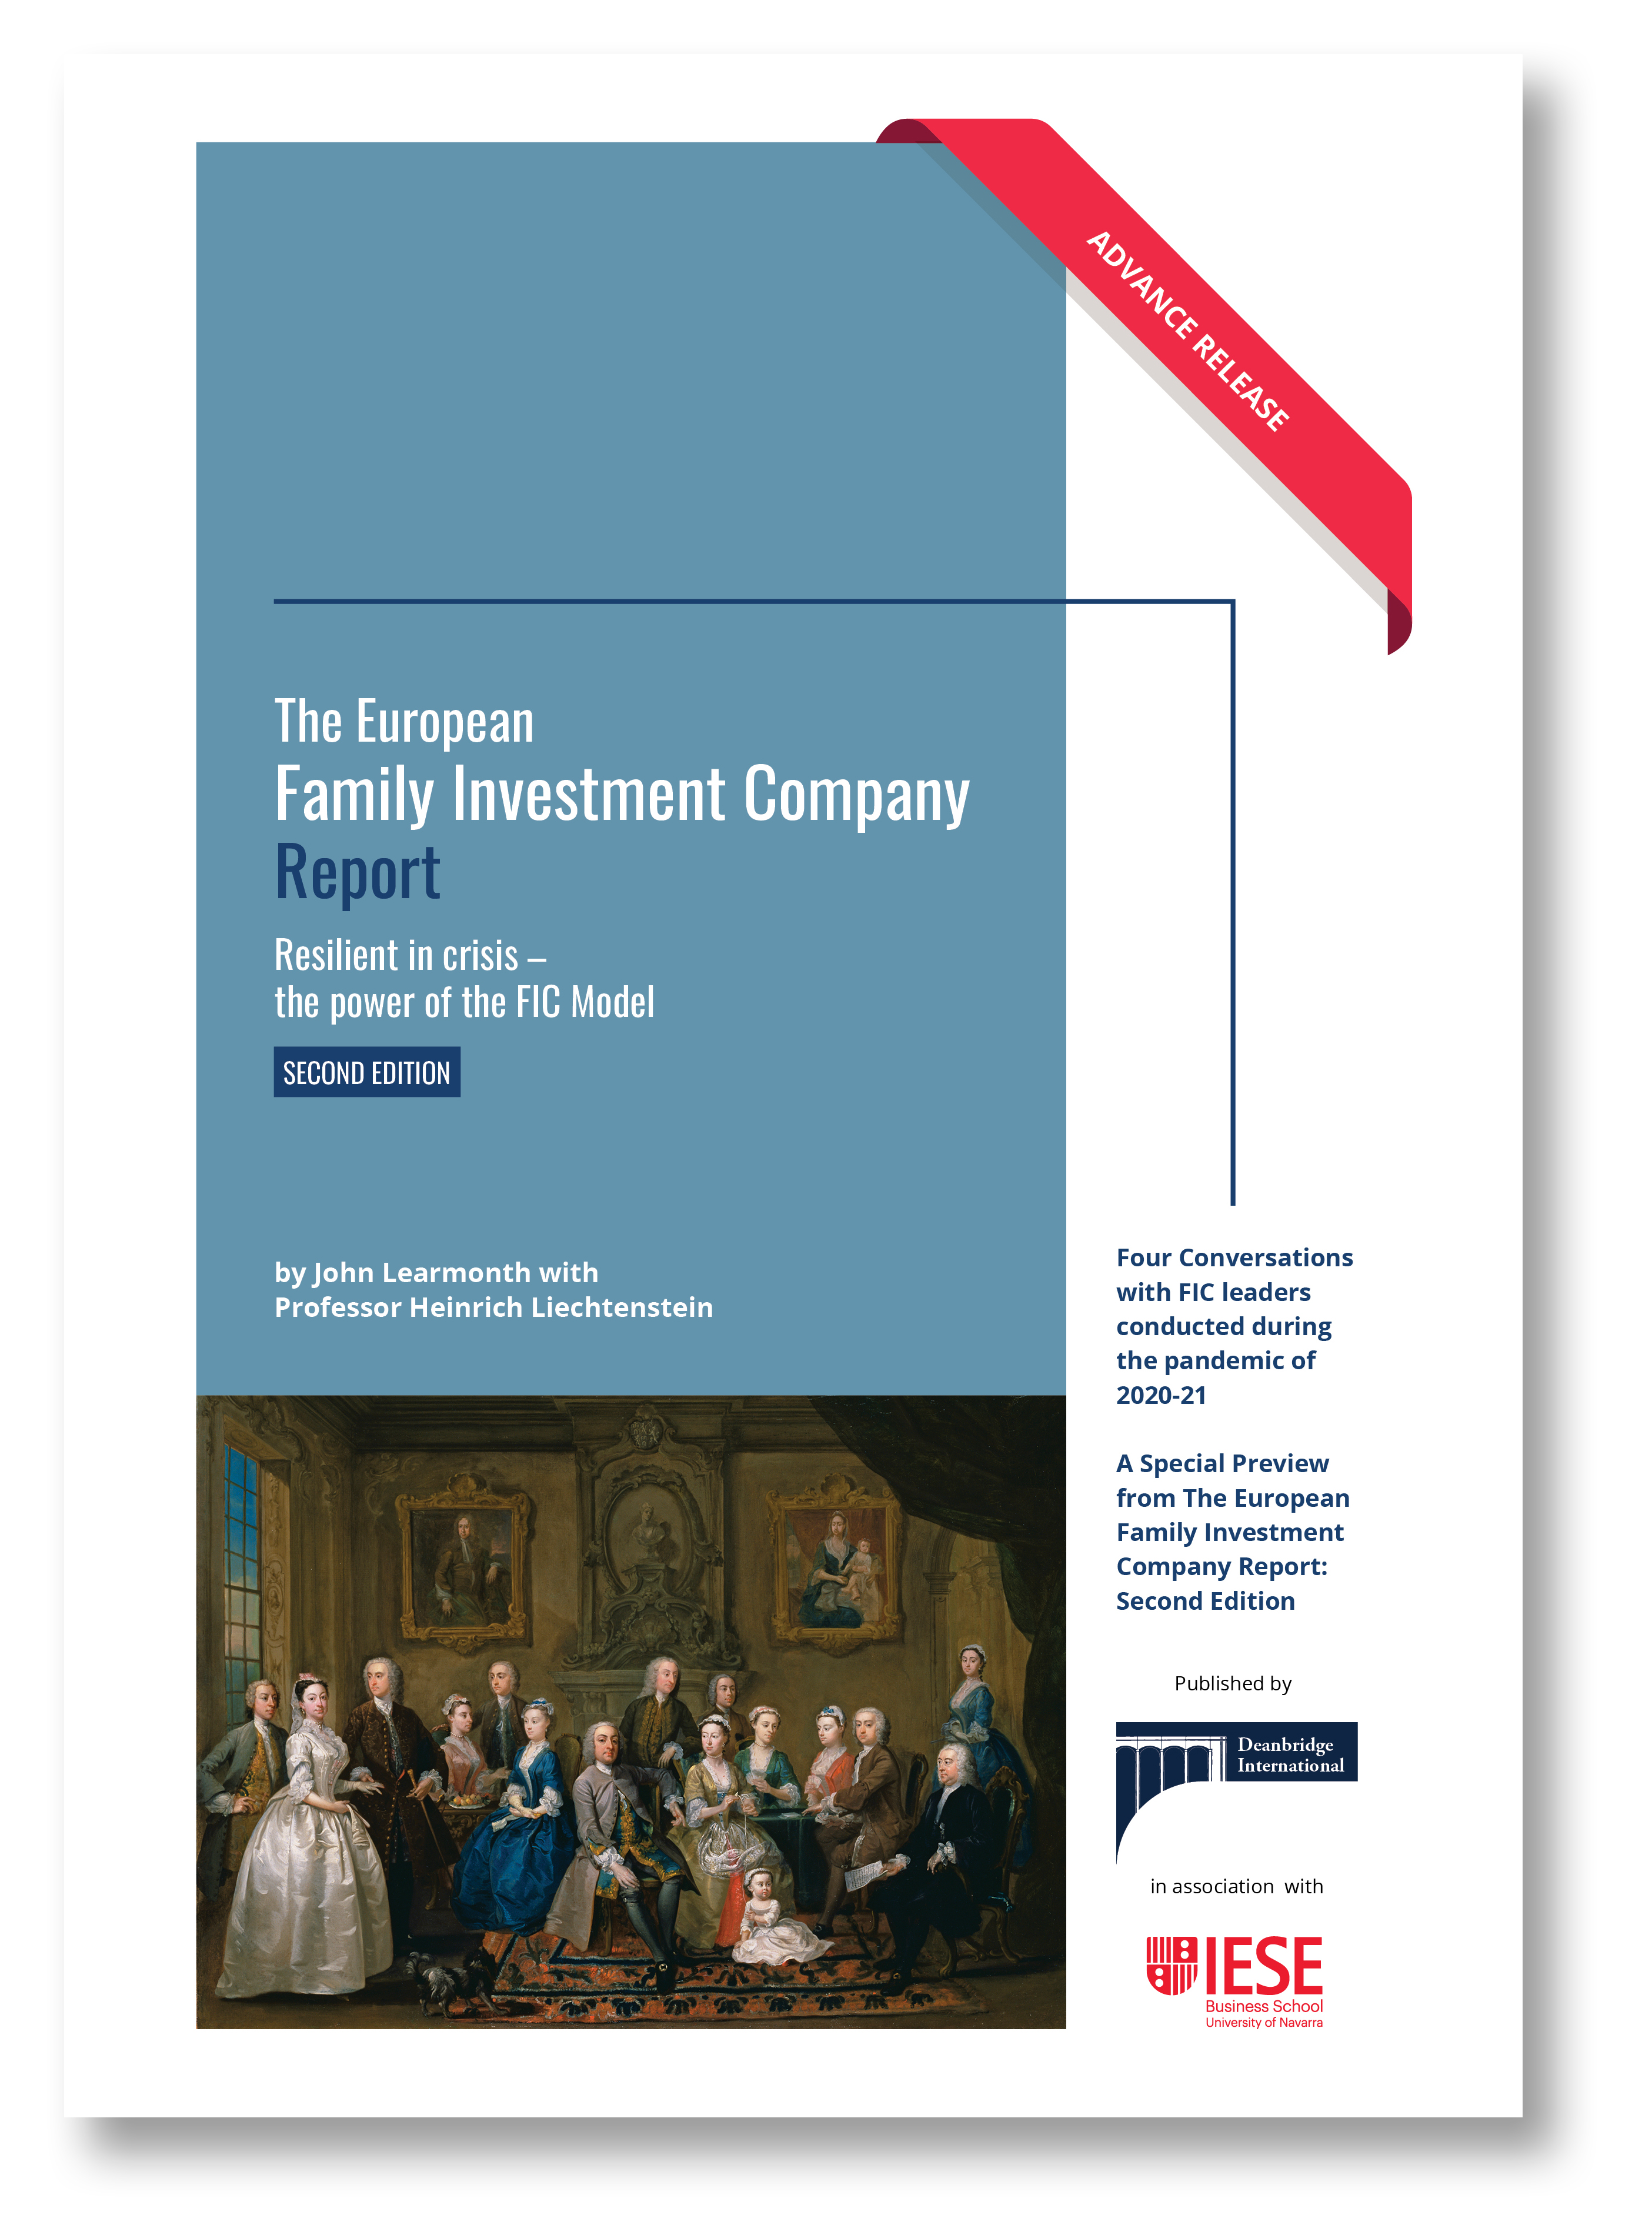 Announcing Publication of The European Family Investment Company Report: Second Edition – Advance Release